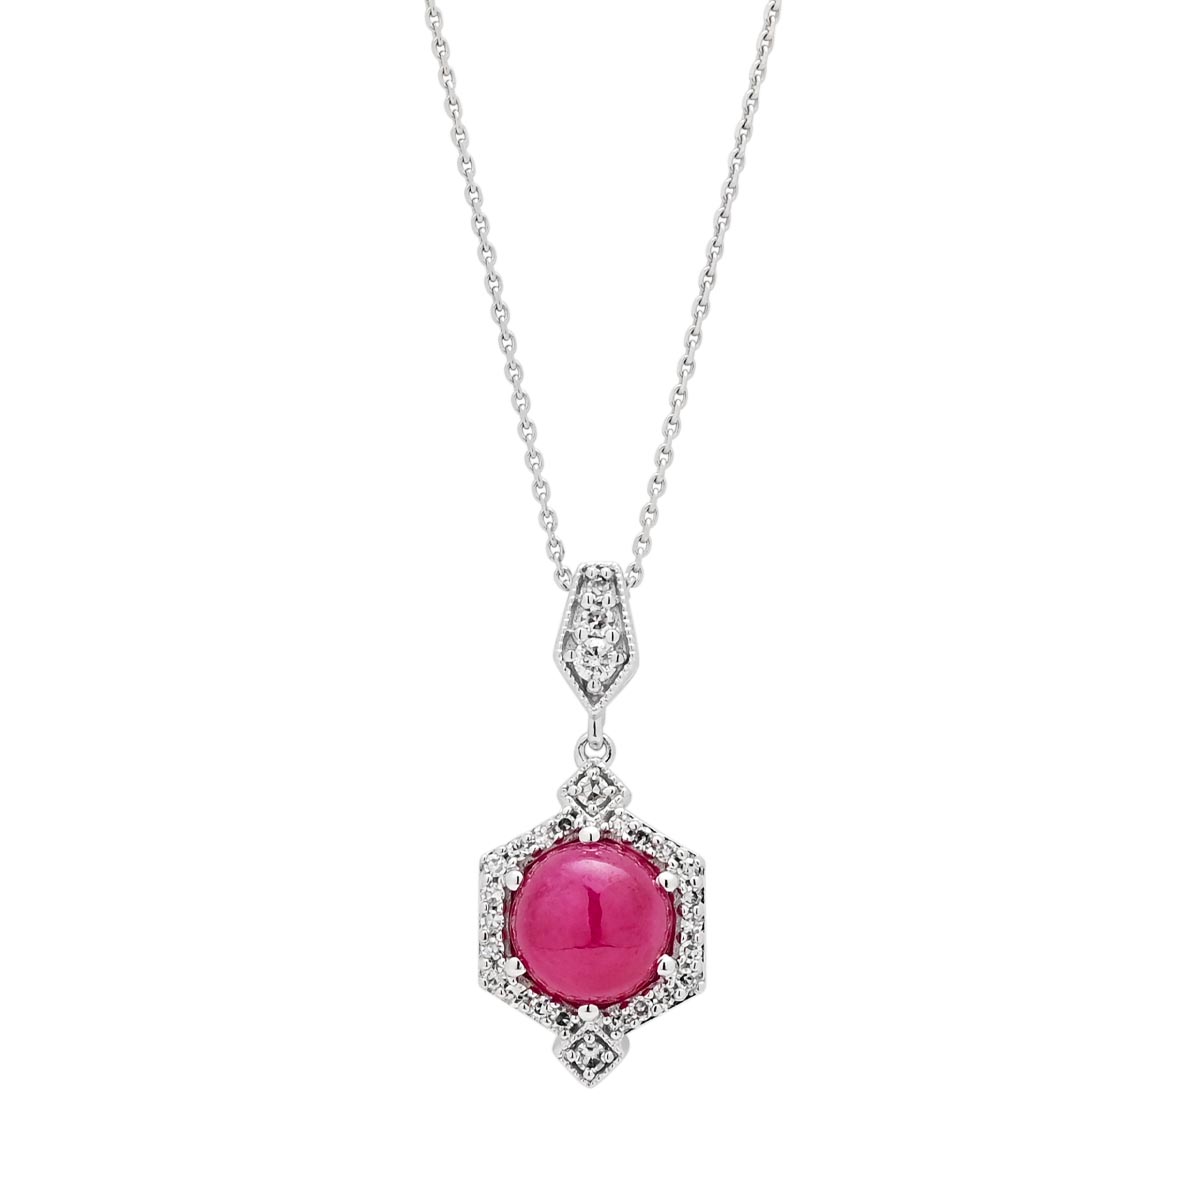 Greenland Ruby Necklace in 10kt White Gold with Diamonds (1/10ct tw)